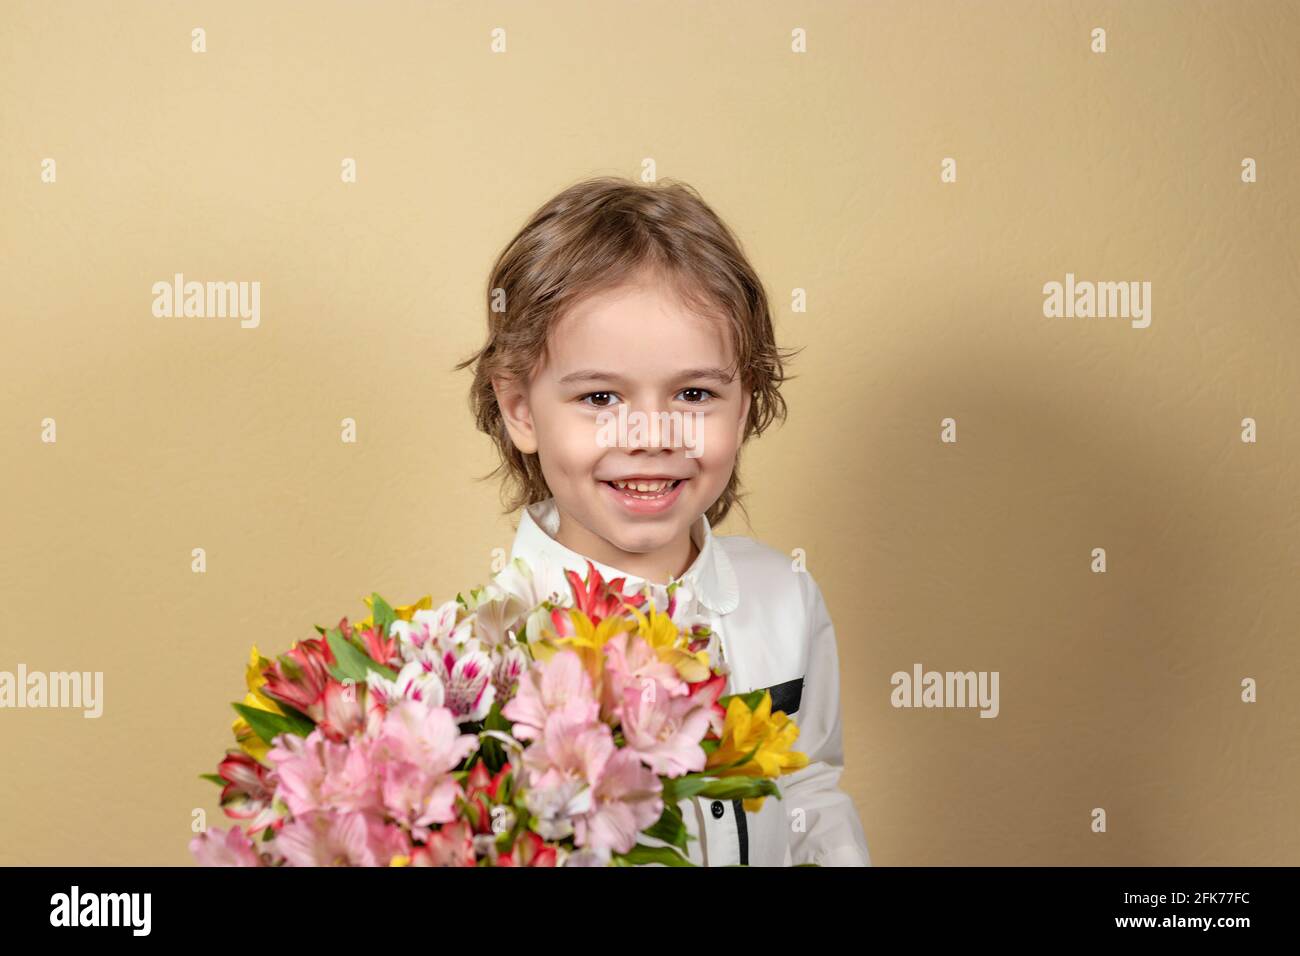 smiling handsome boy holds out a bouquet of colorful flowers. happy child gives a bouquet of multicolored alstroemeria. Soft focus Stock Photo